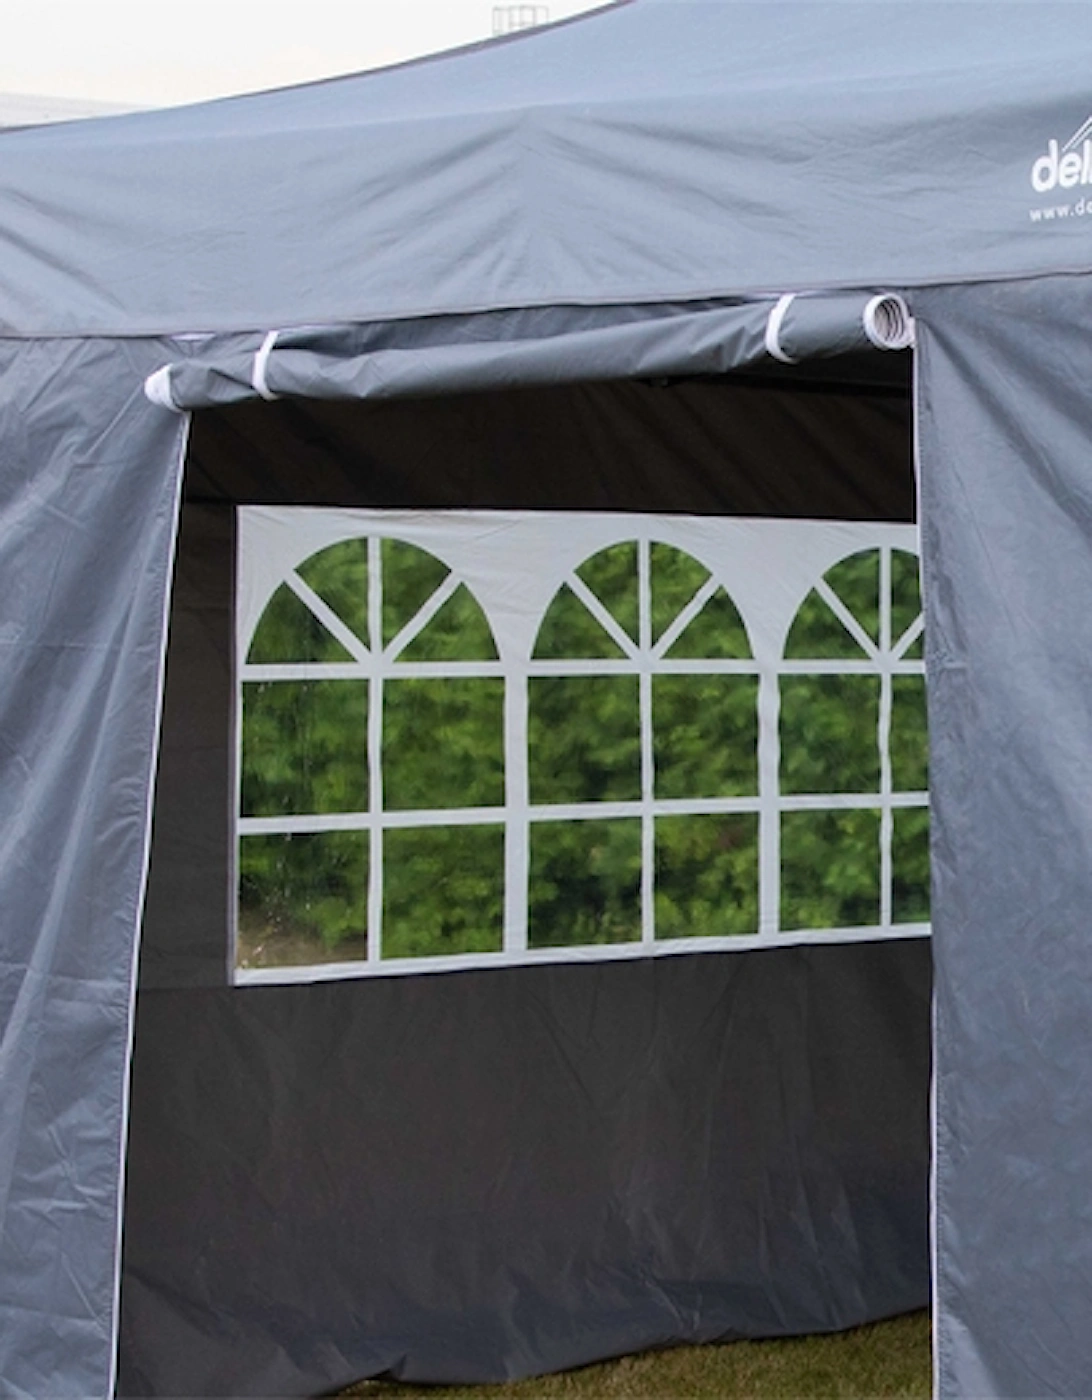 Premium 3x3m Pop-Up Gazebo & Side Walls, Water Resistant, Carry Bag, Stakes & Weight Bags Grey